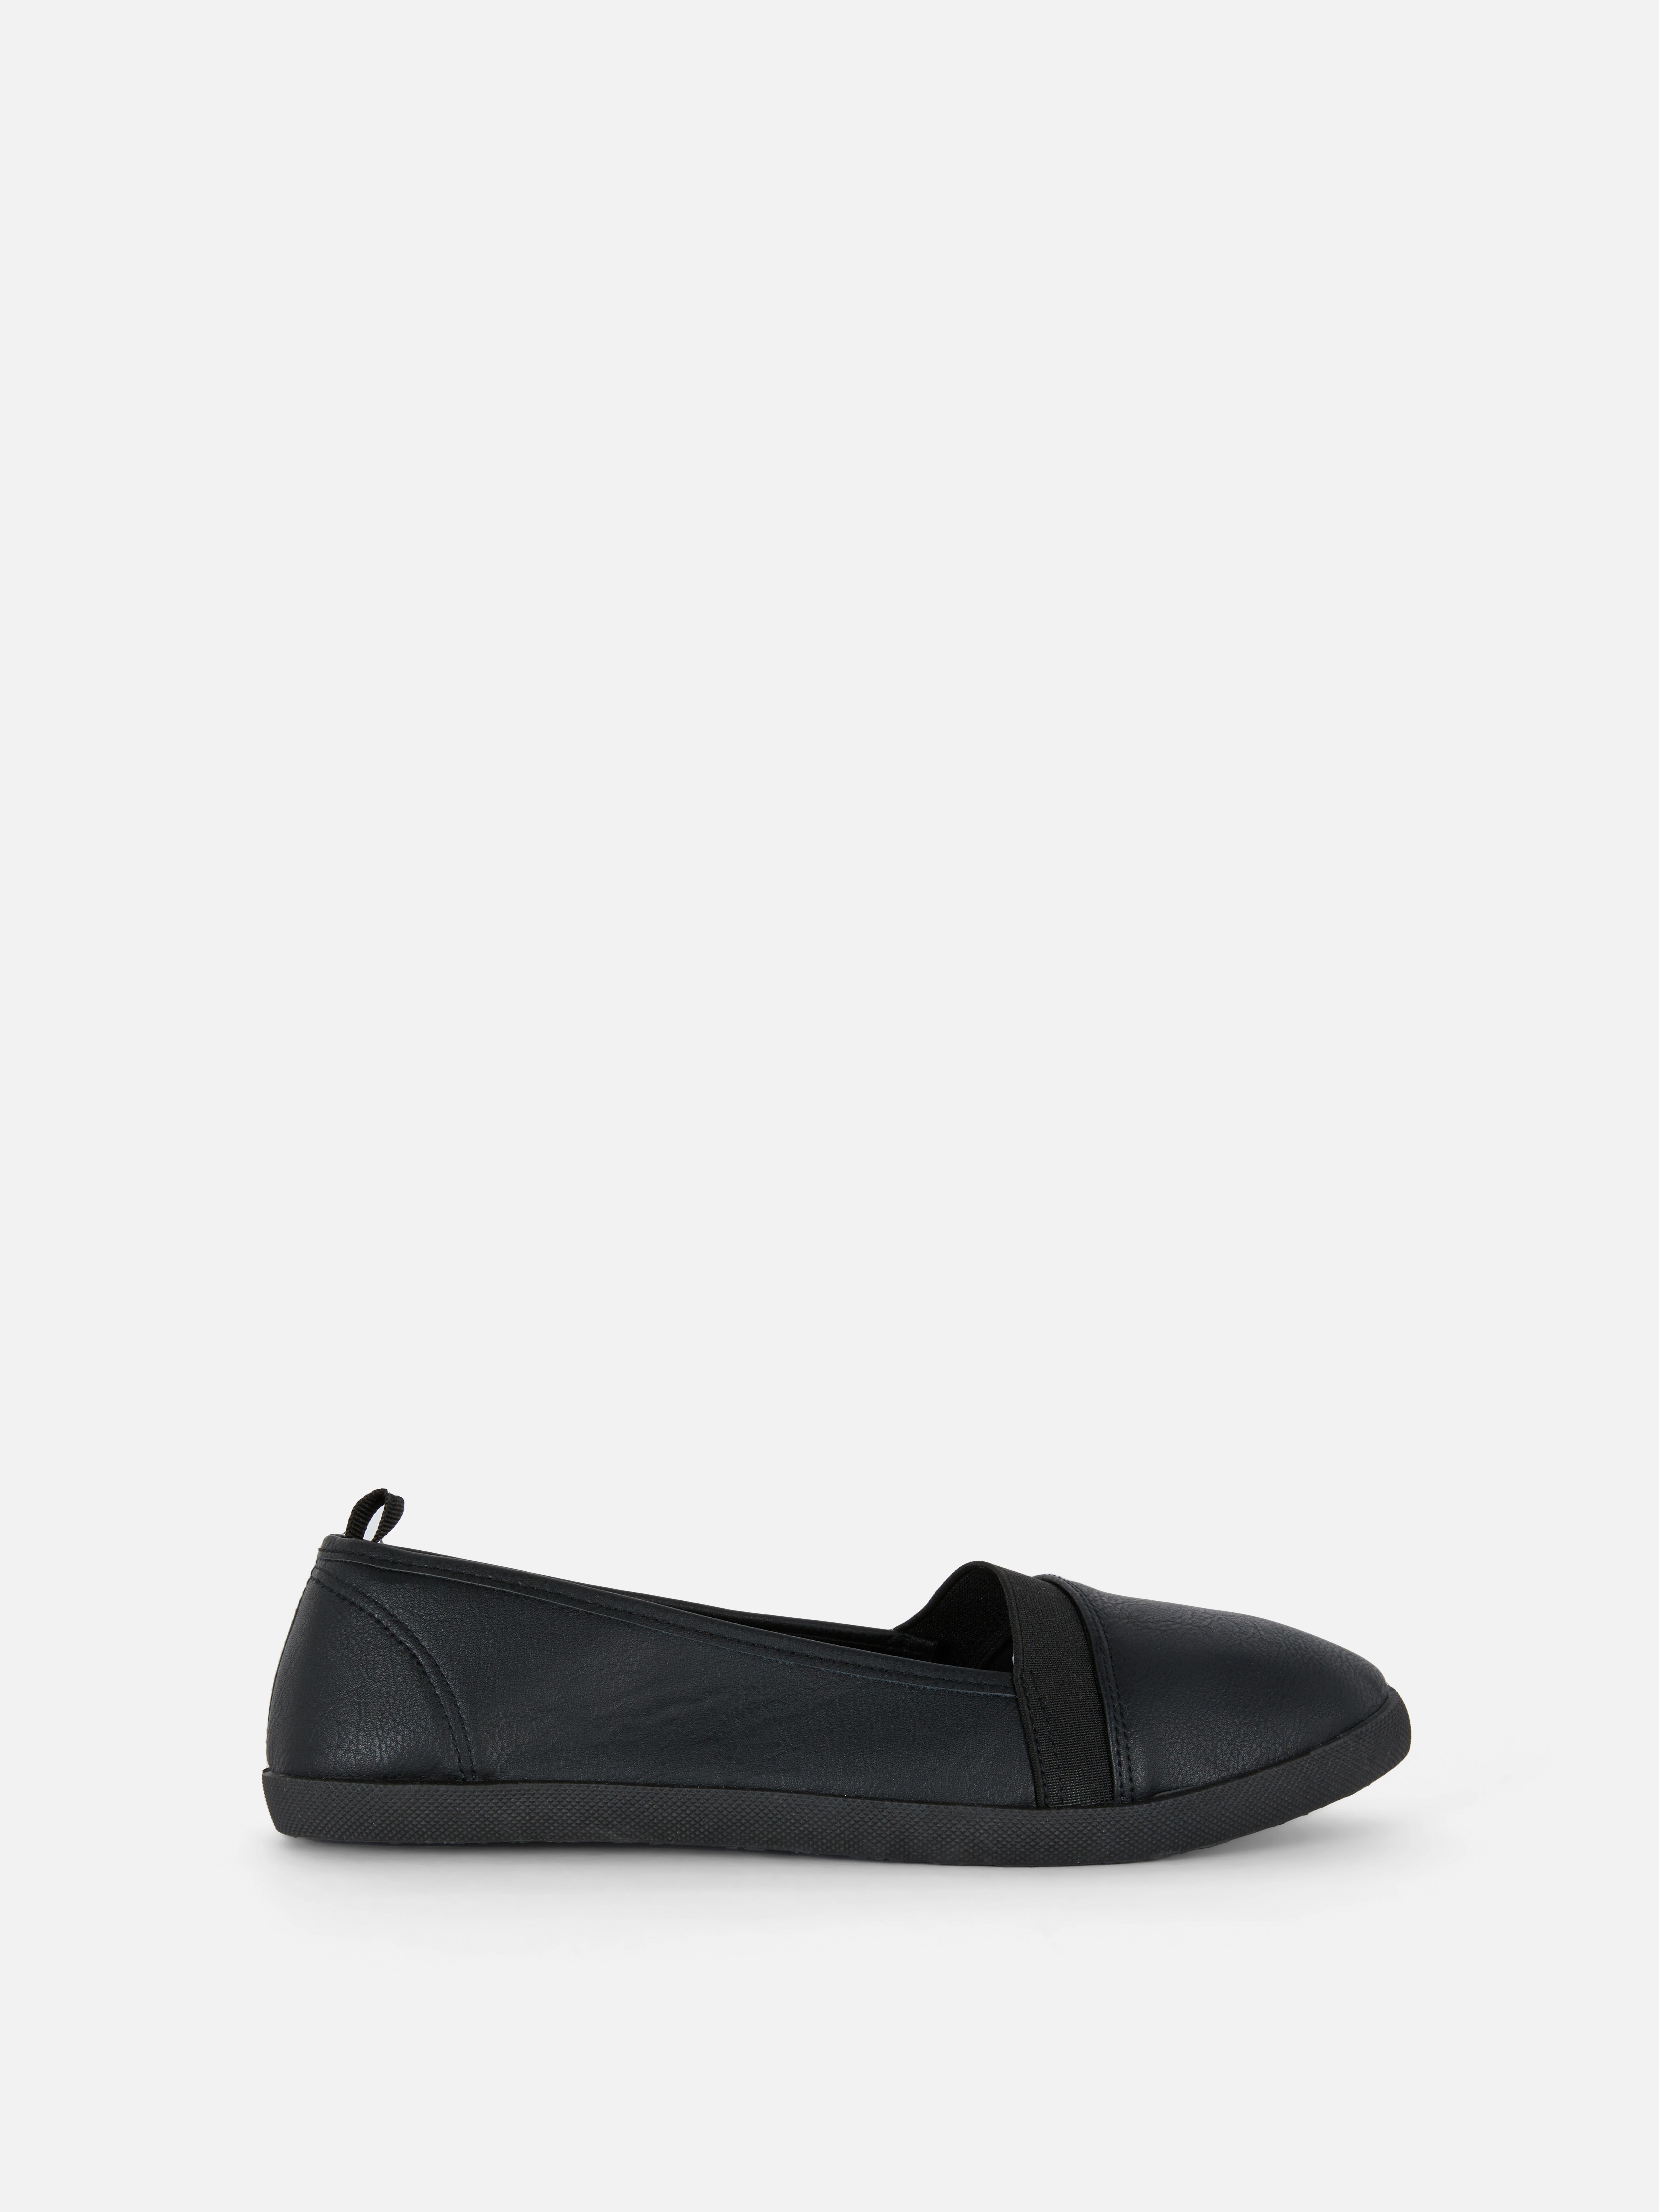 Faux Leather Slip-On Shoes